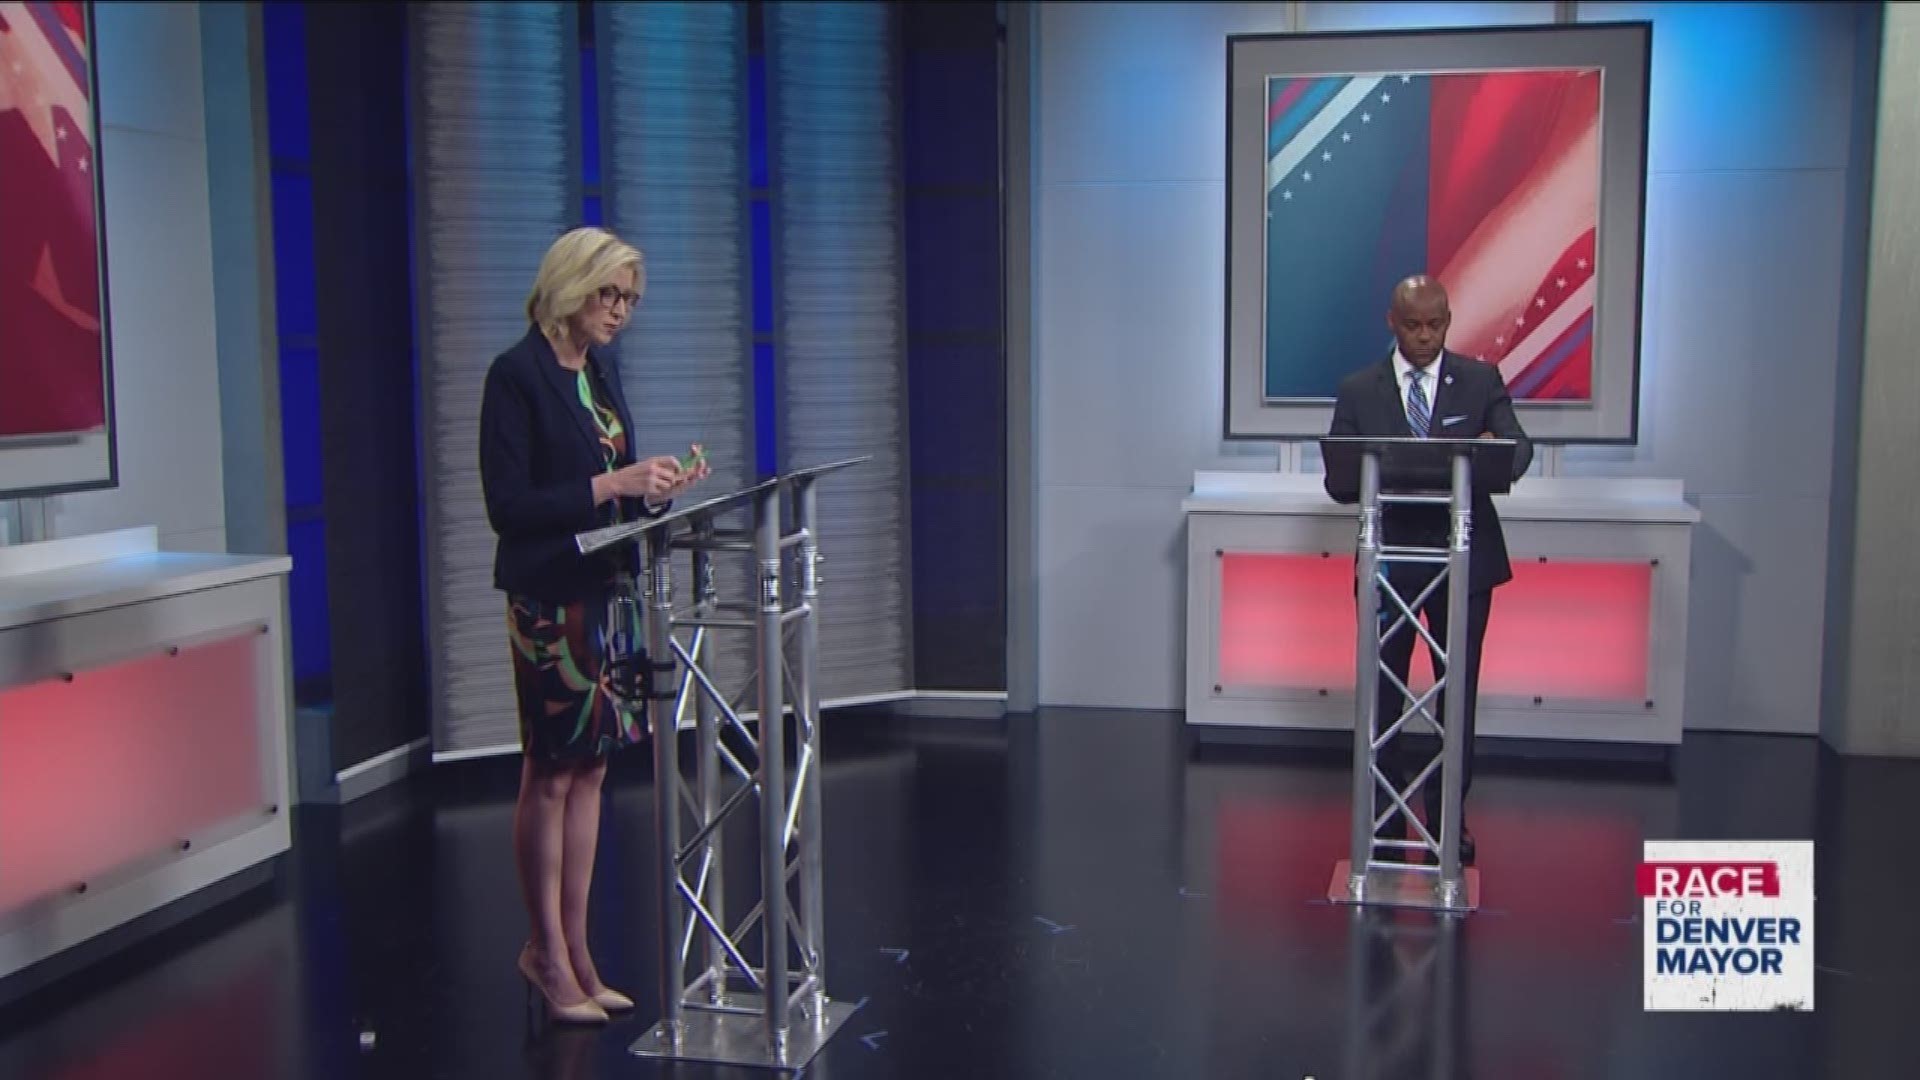 Denver mayoral candidates Michael Hancock and Jamie Giellis discuss bedgeting for school safety resources during a 9NEWS mayoral debate ahead of the June 4 runoff election.